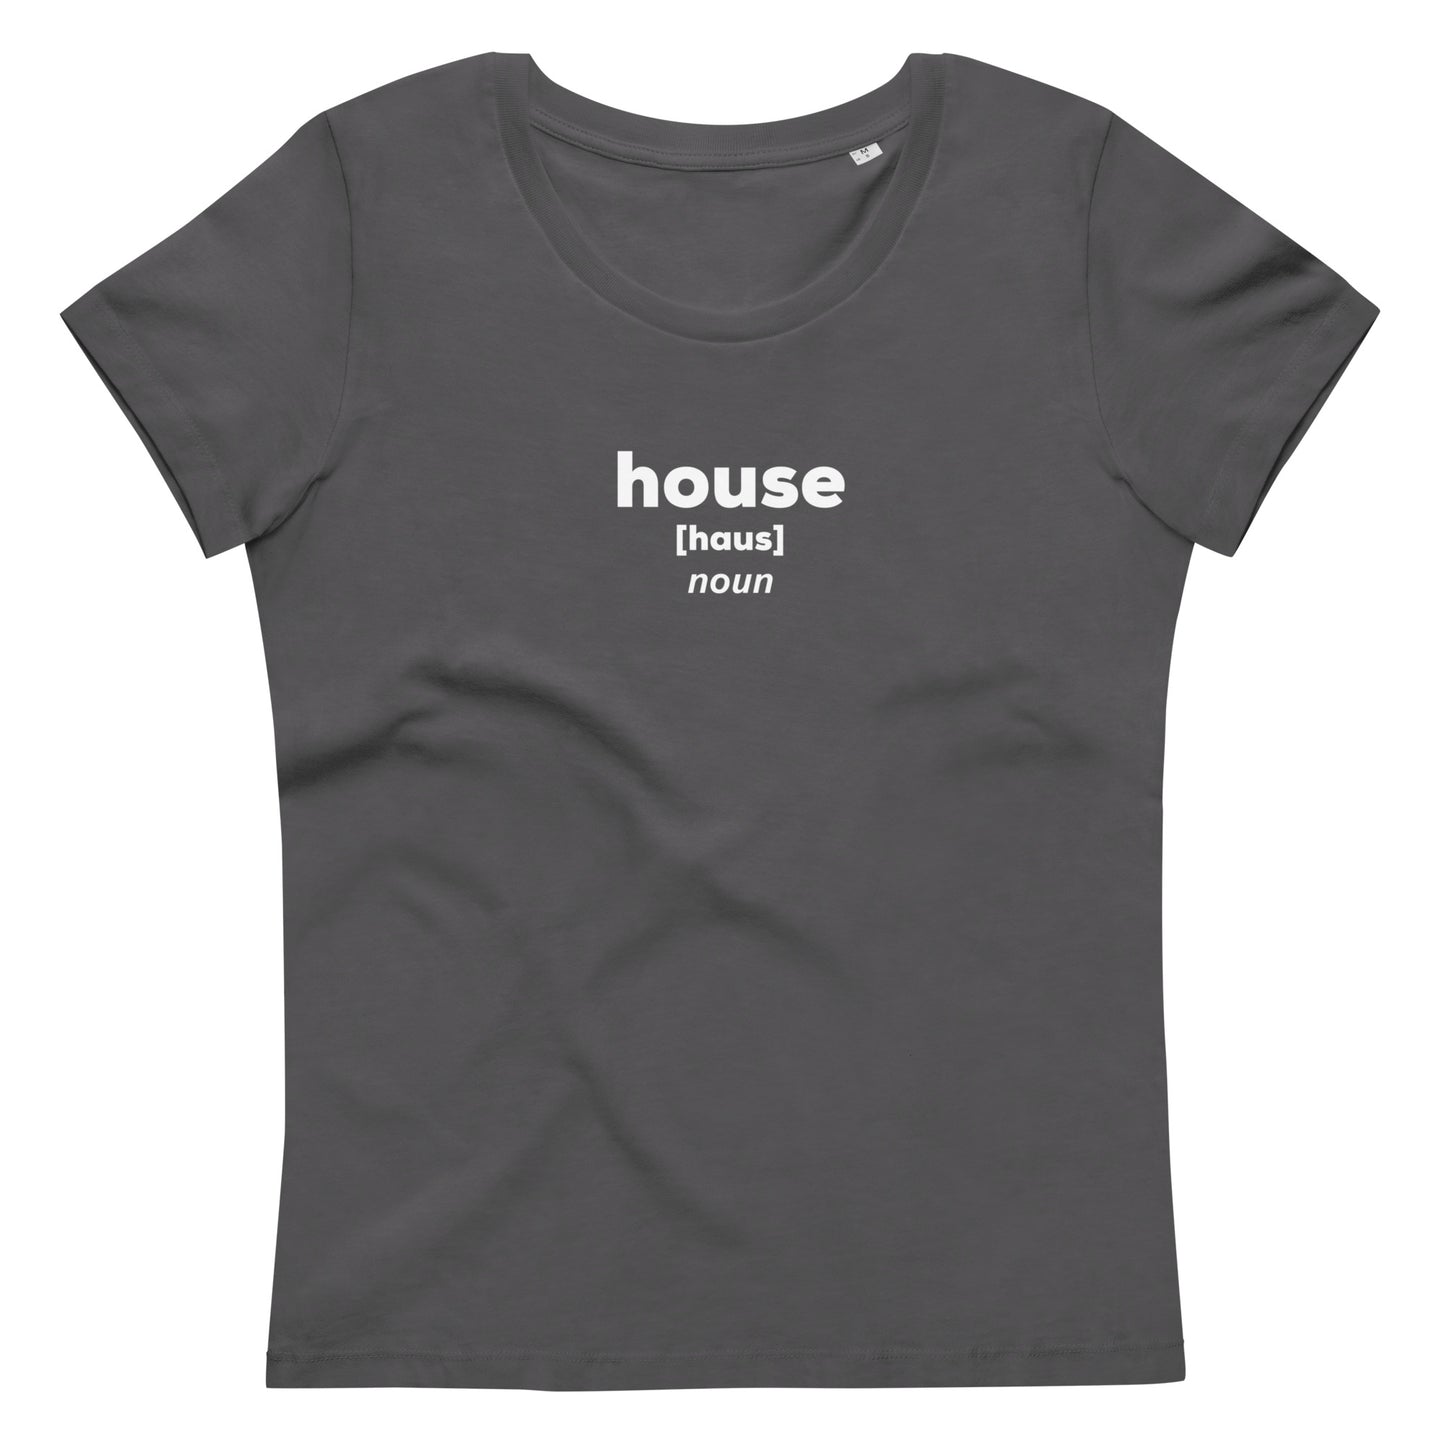 House [haus] Definition - Women's Fitted T-Shirt